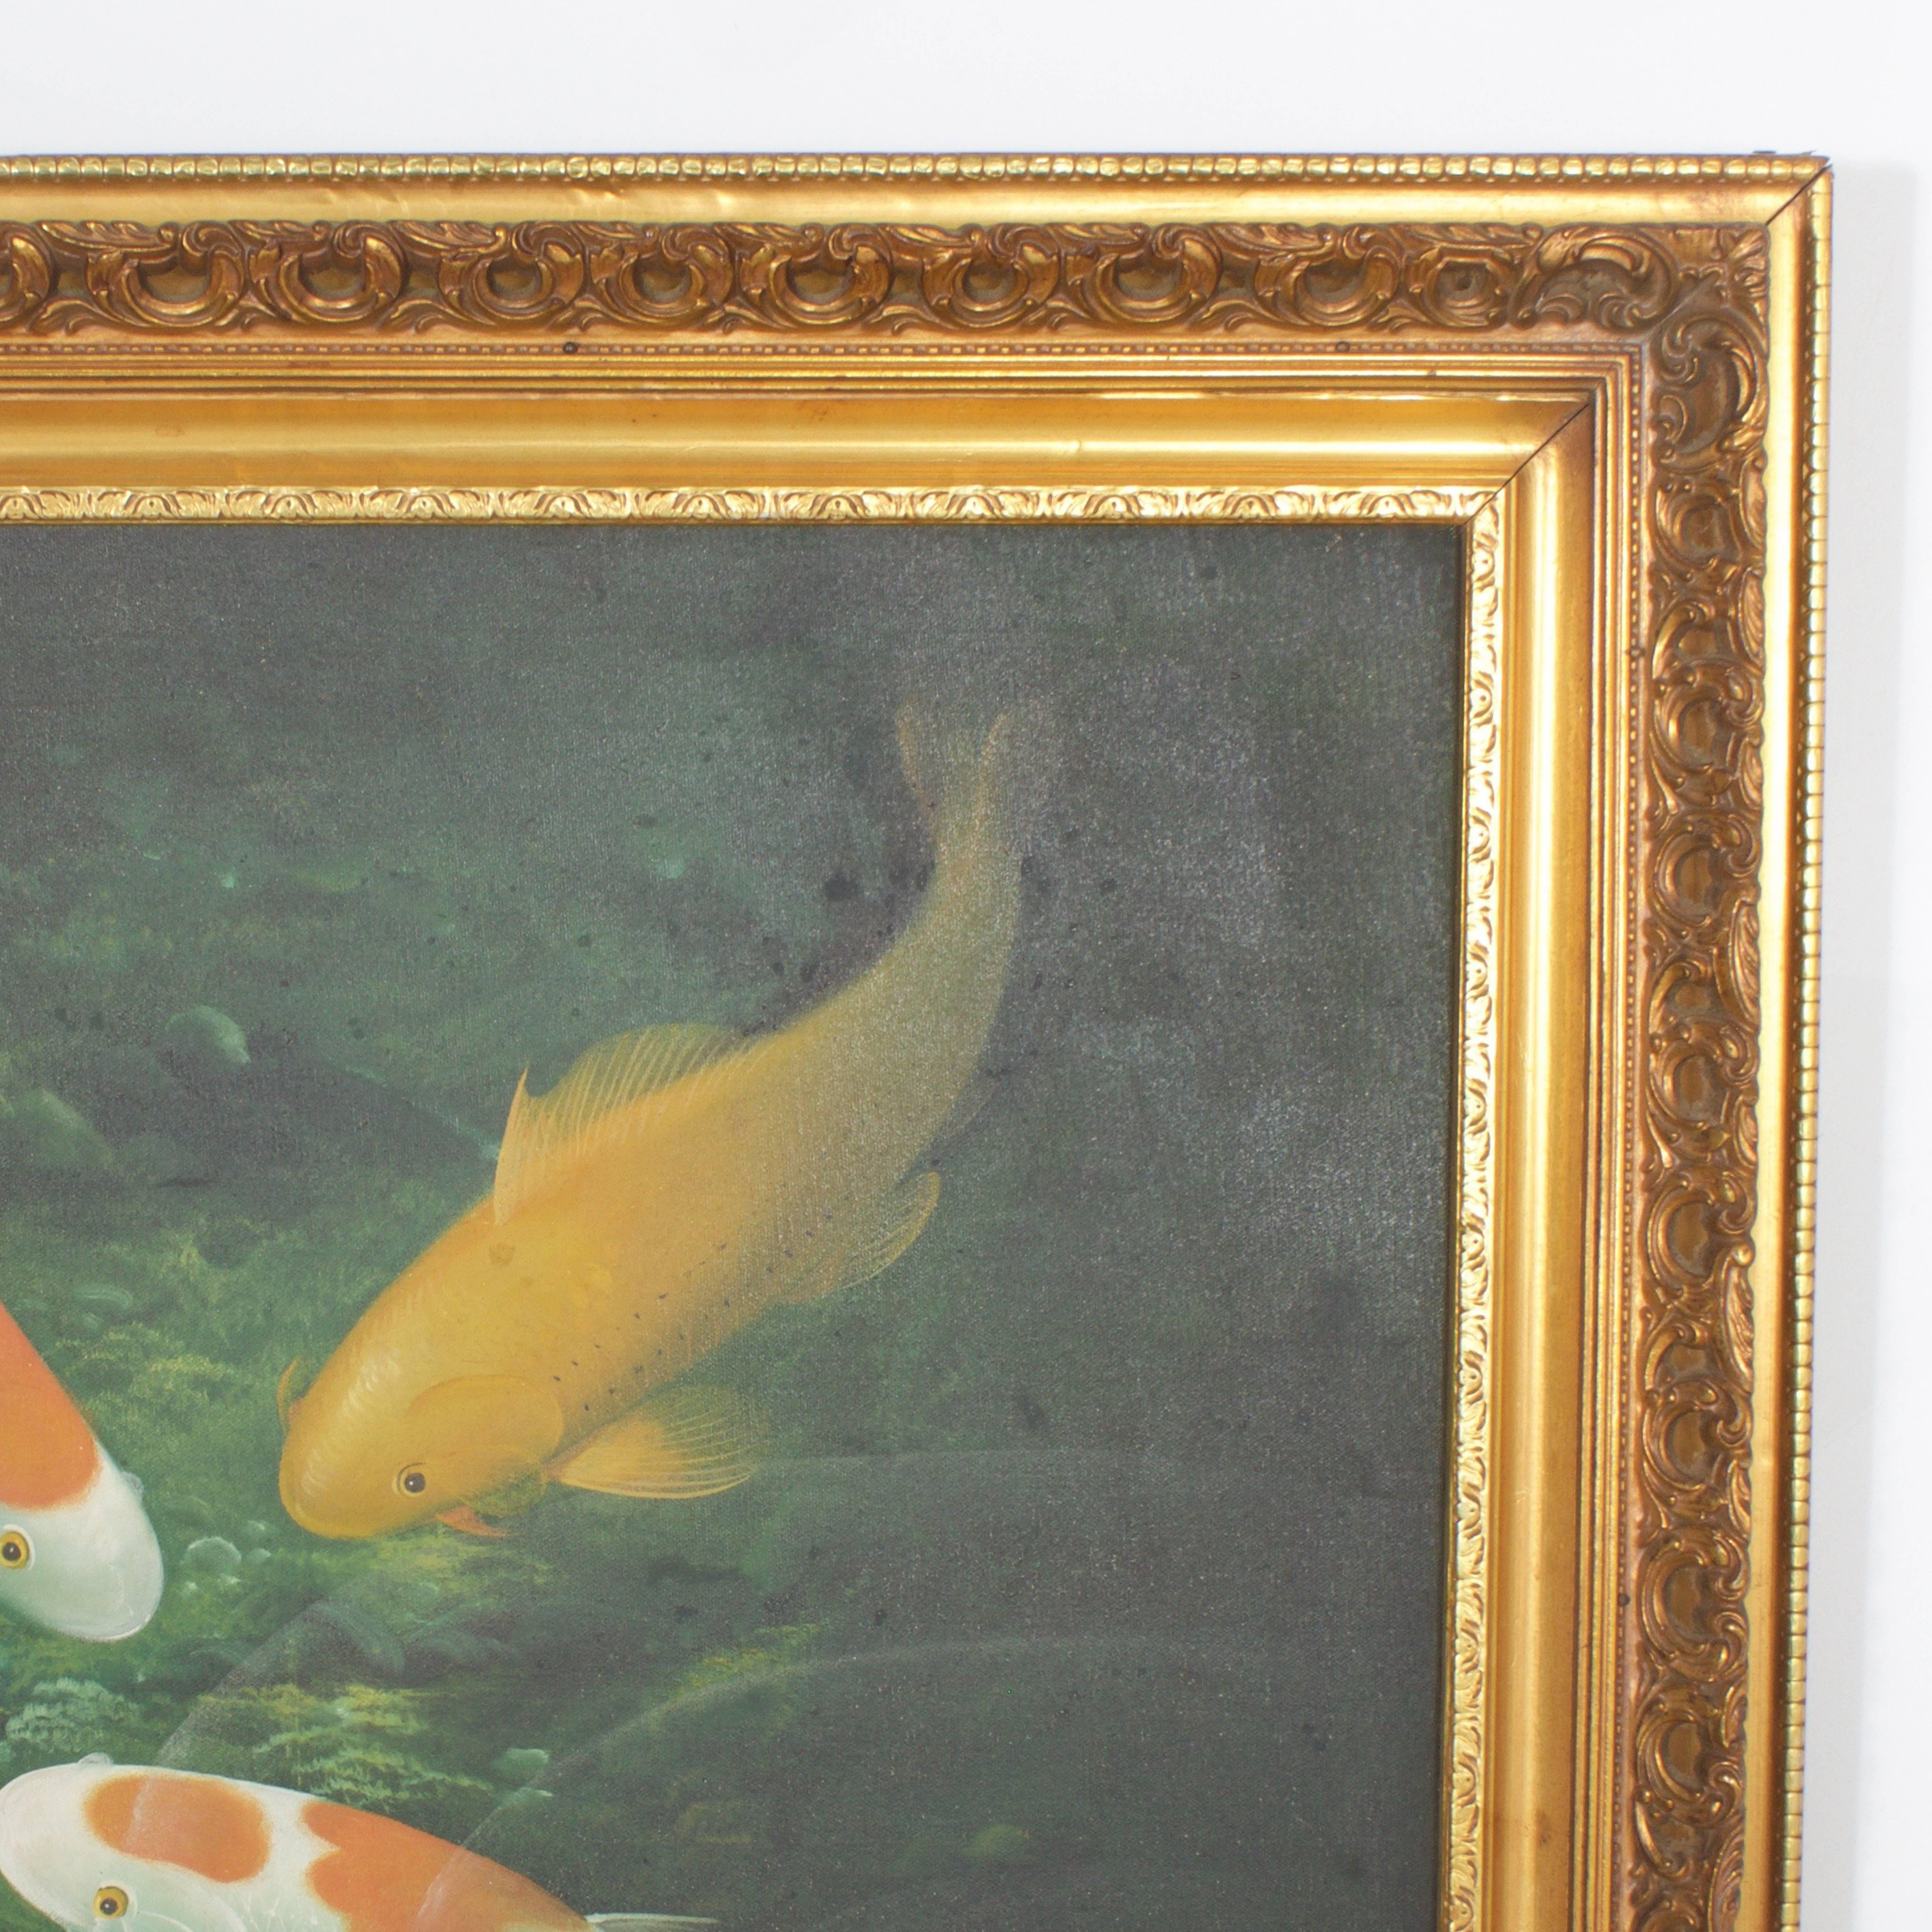 As if peering down into a koi fish pond this oil painting on canvas seems to capture the inherent peace of the floating and gathering gold fish. Featuring the difficult technique of painting a gentle surface ripple. Signed Graves and in its original